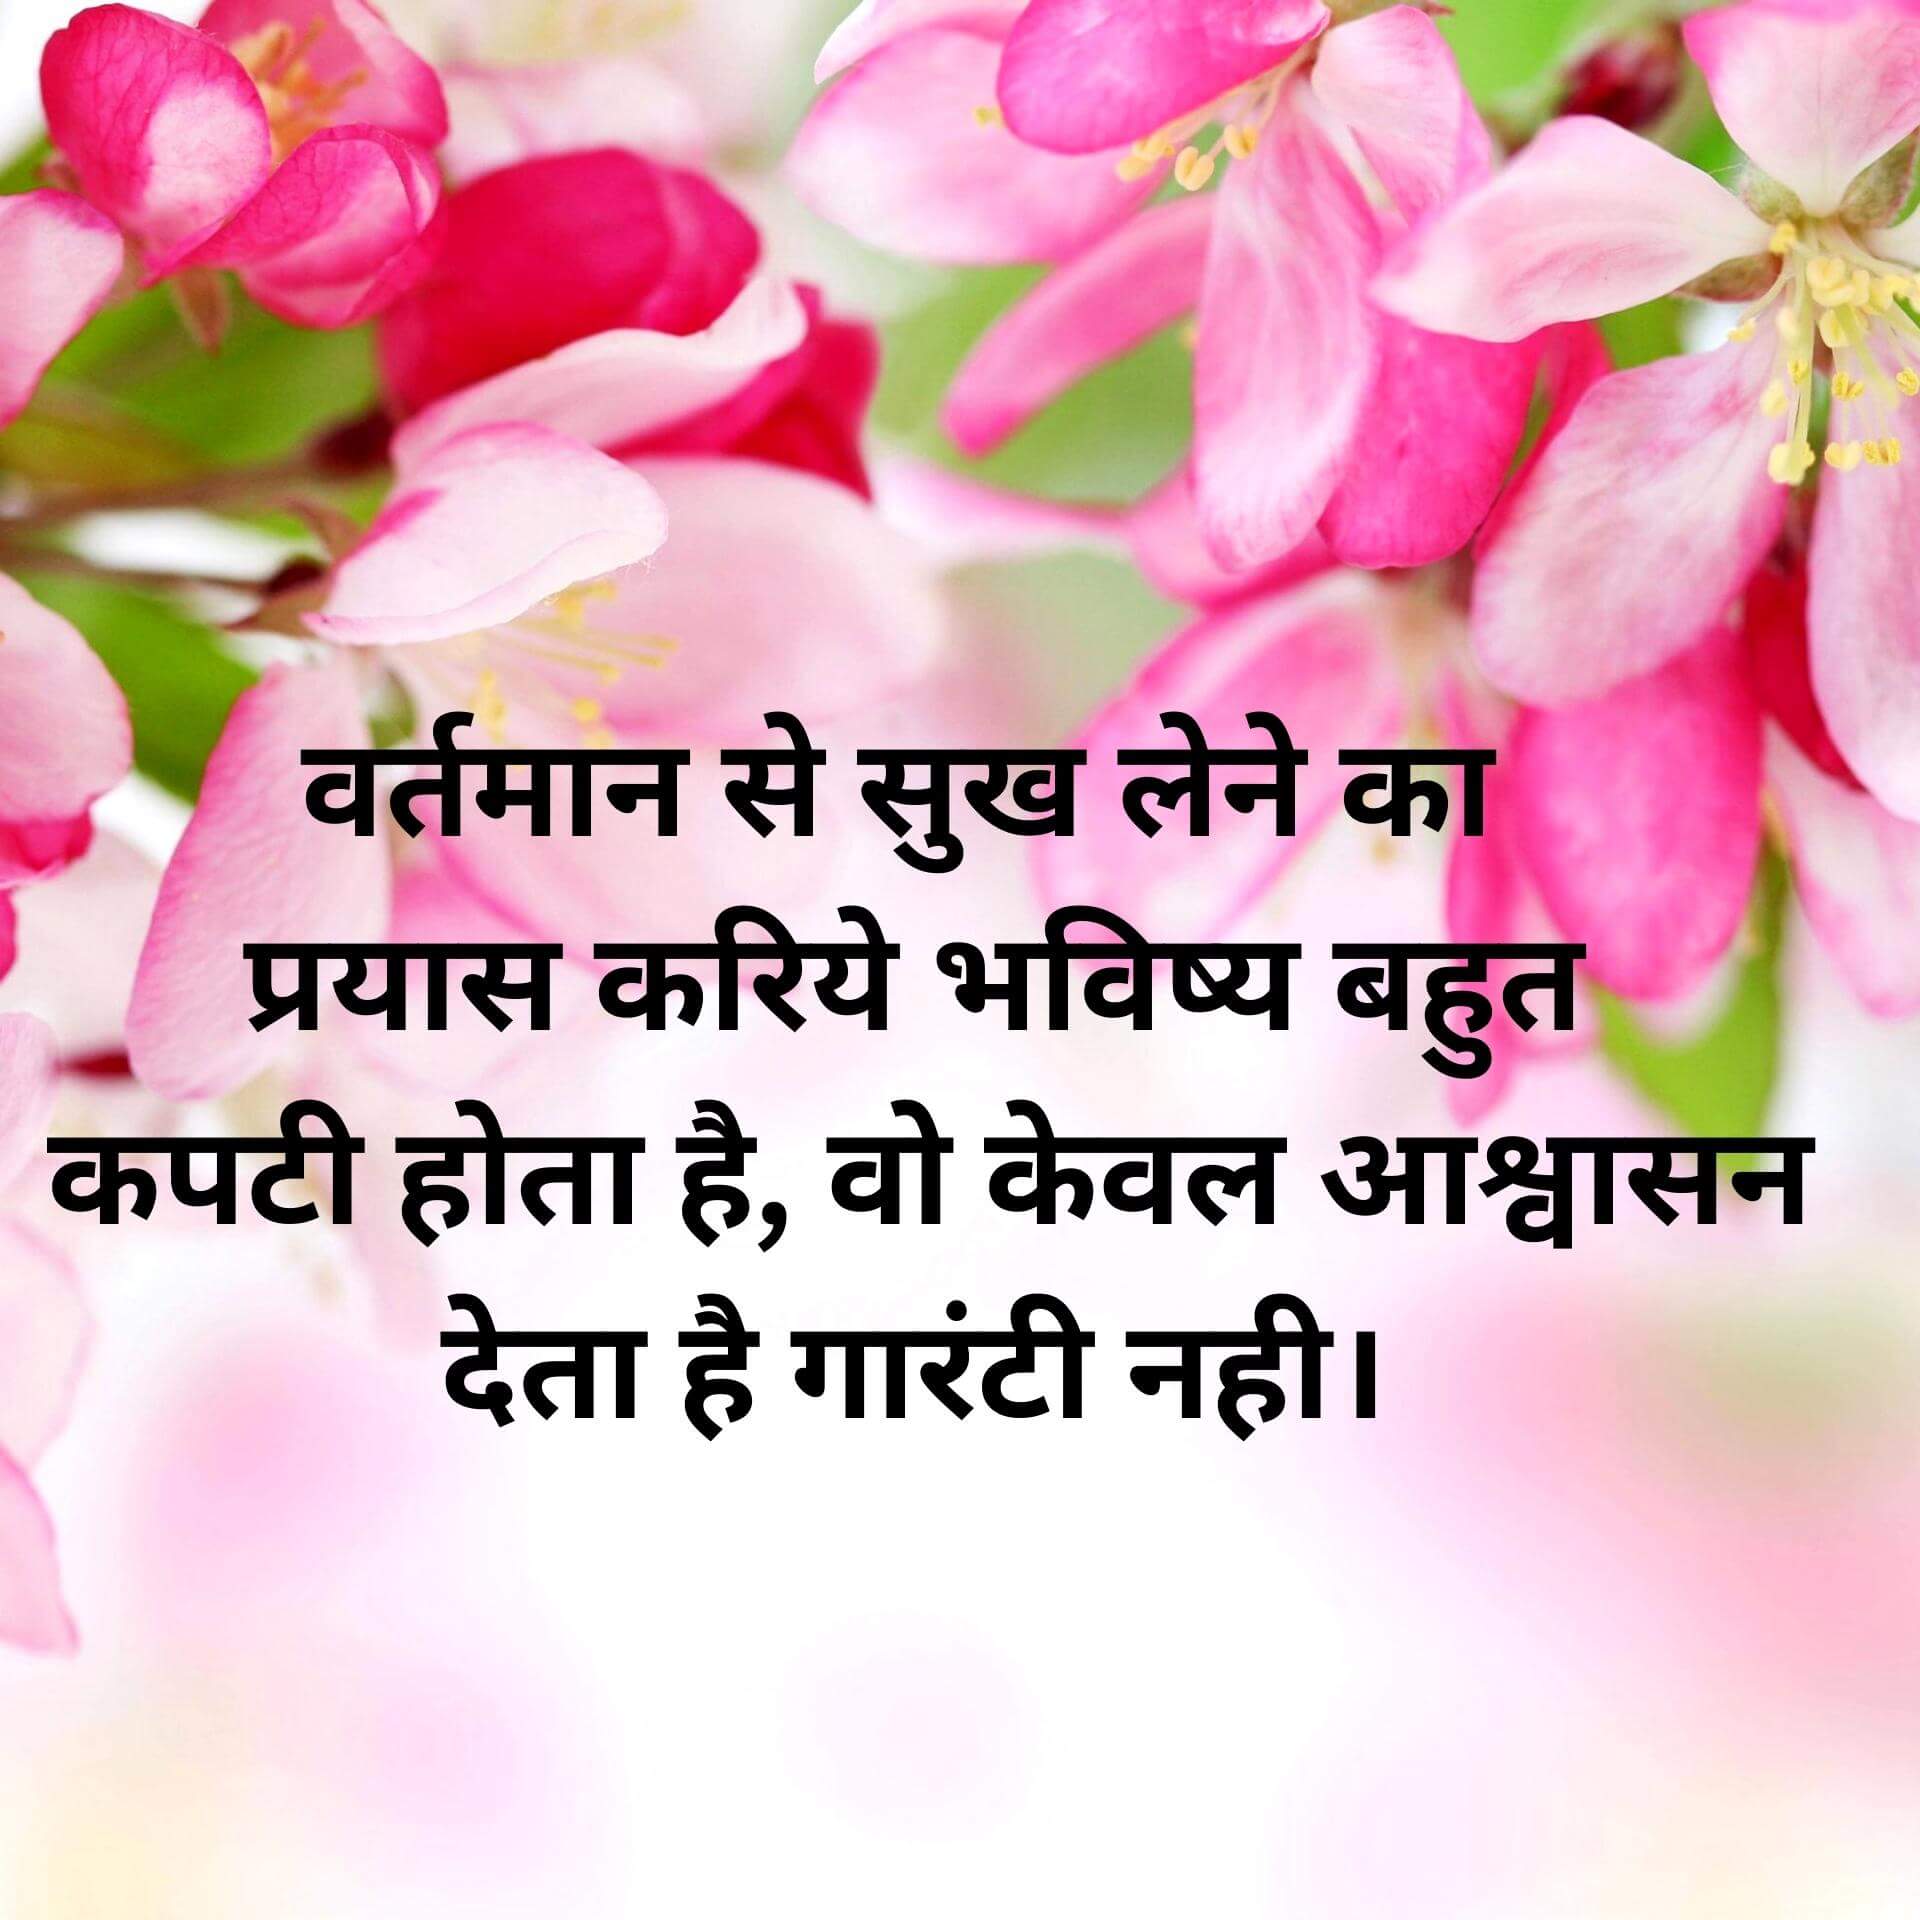 Suprabhat Images Wallpaper With Hindi Quotes